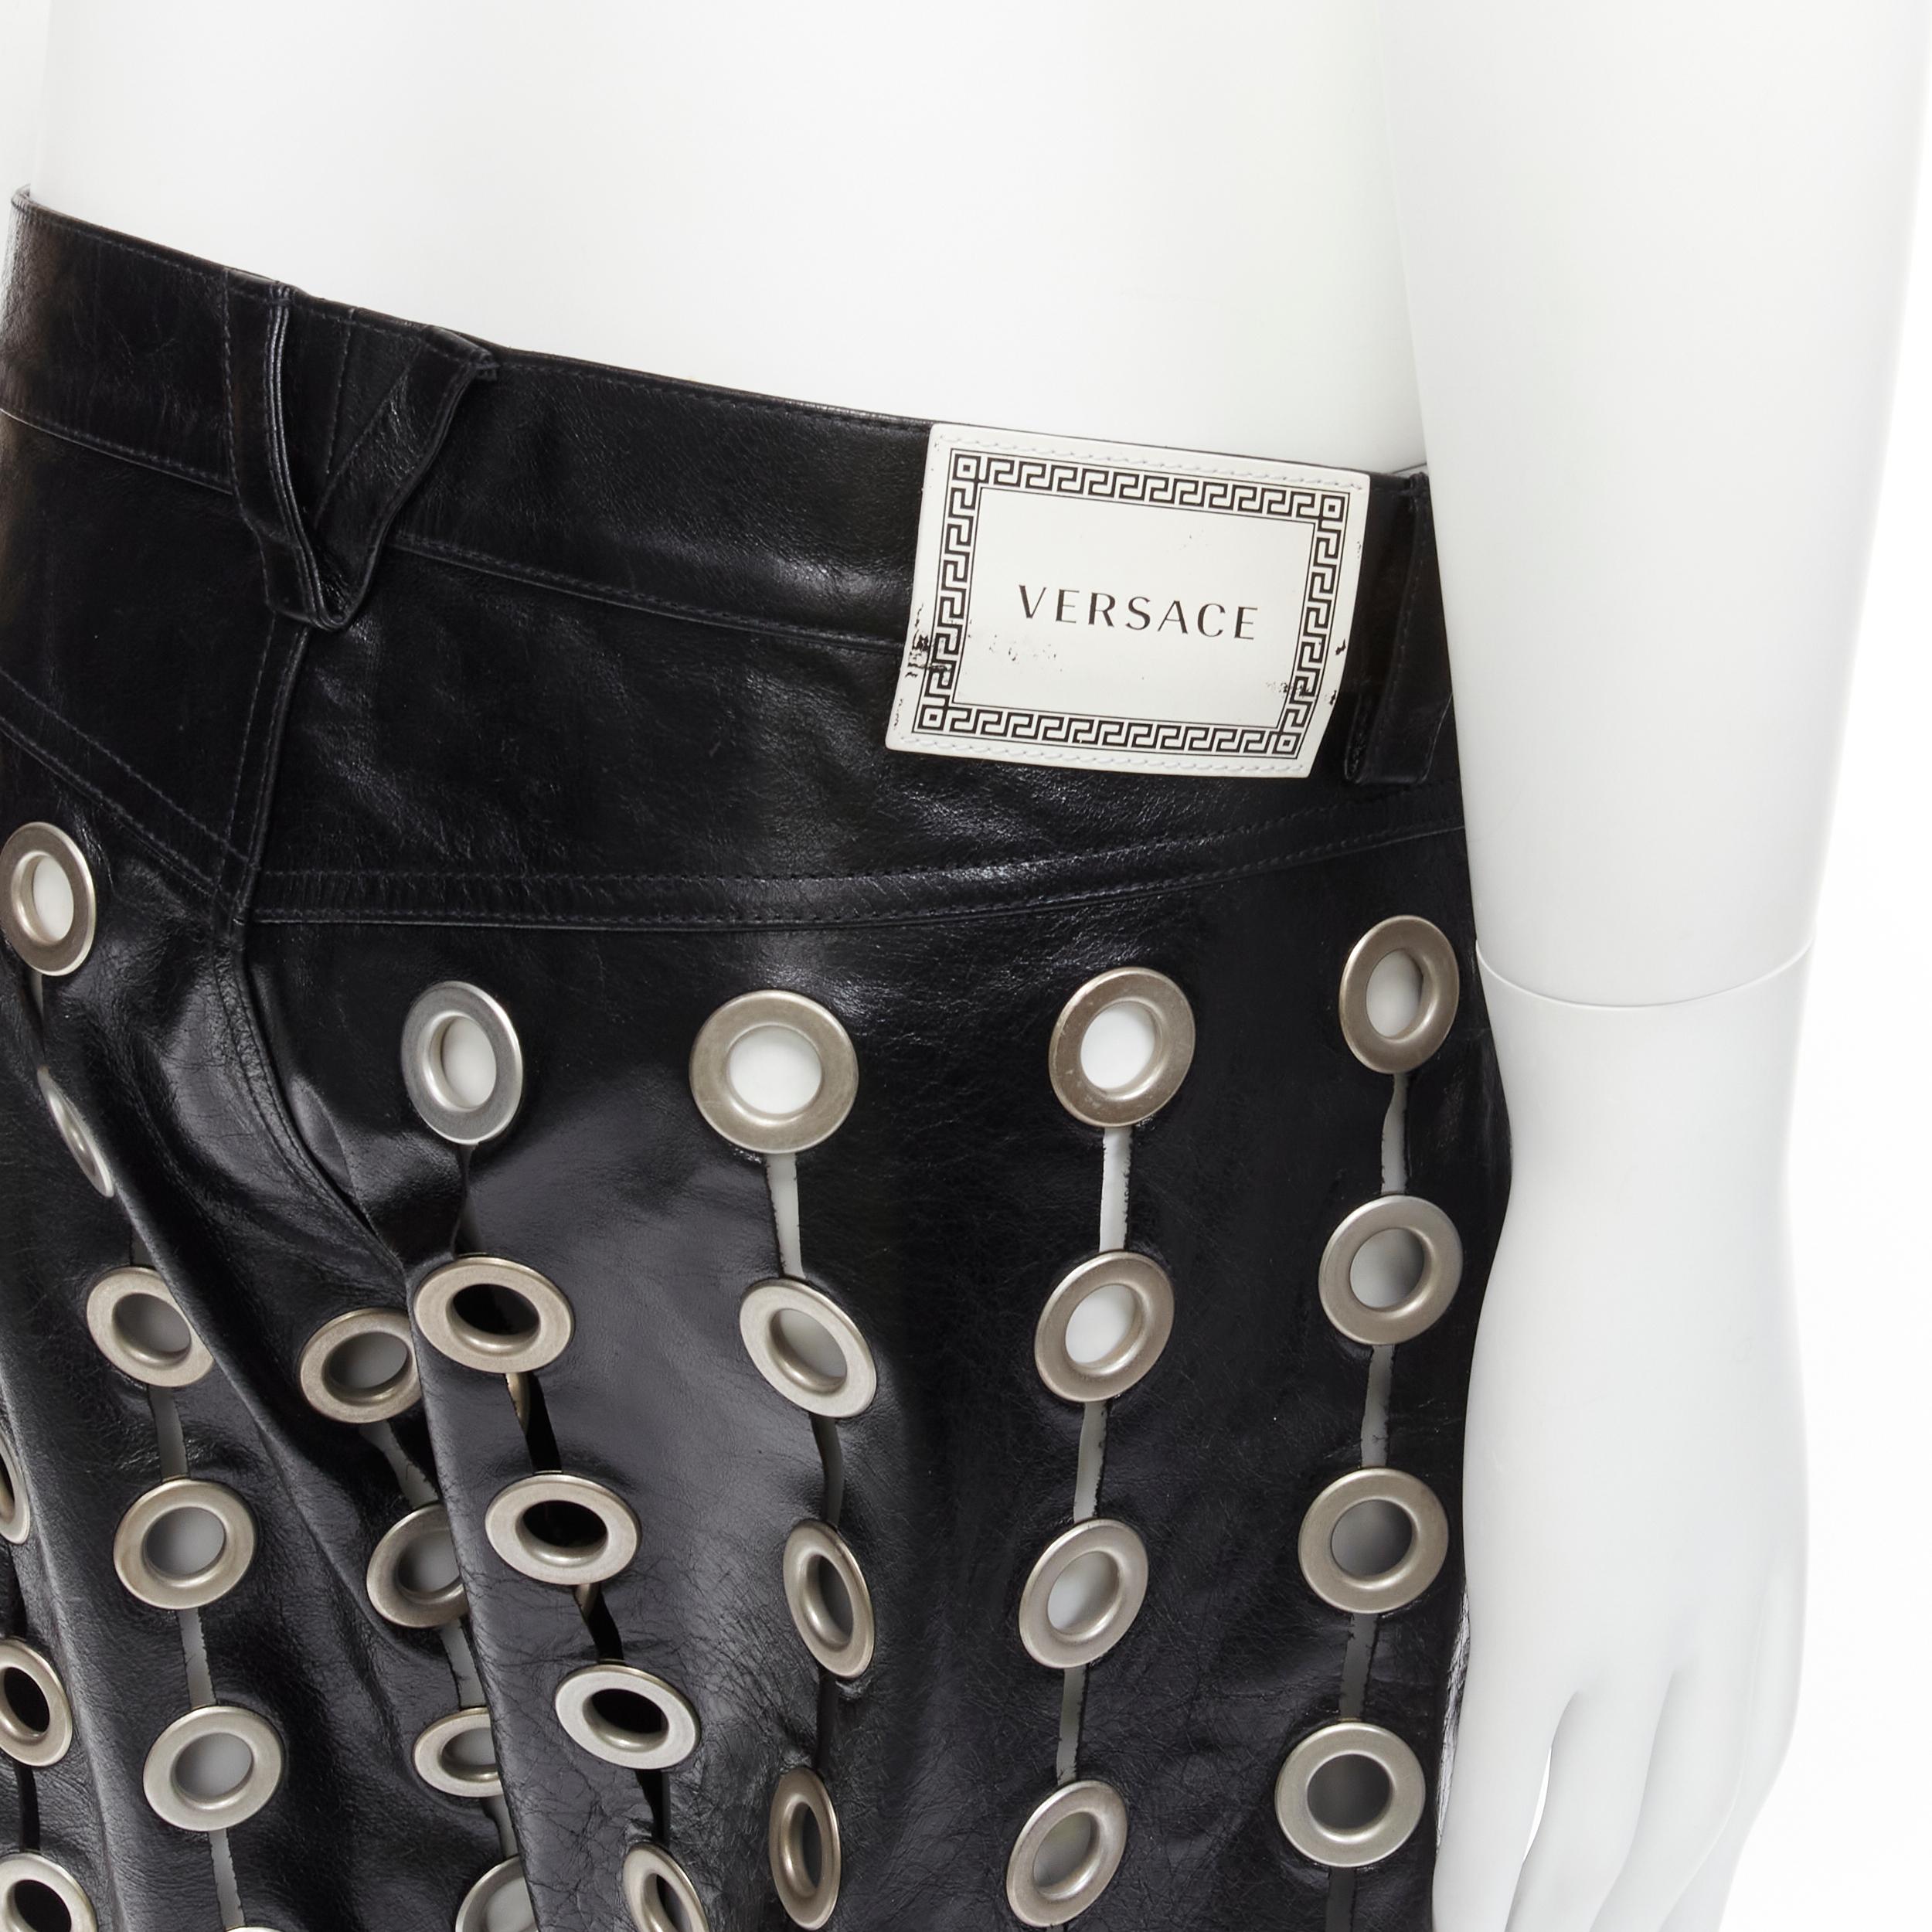 new VERSACE 2020 Runway Punk eyelet grommet embellished leather pants IT50 L
Reference: TGAS/C01802
Brand: Versace
Designer: Donatella Versace
Model: A85174 A233850 A1008
Collection: SS2020 - Runway
Material: Leather, Metal
Color: Black
Pattern: